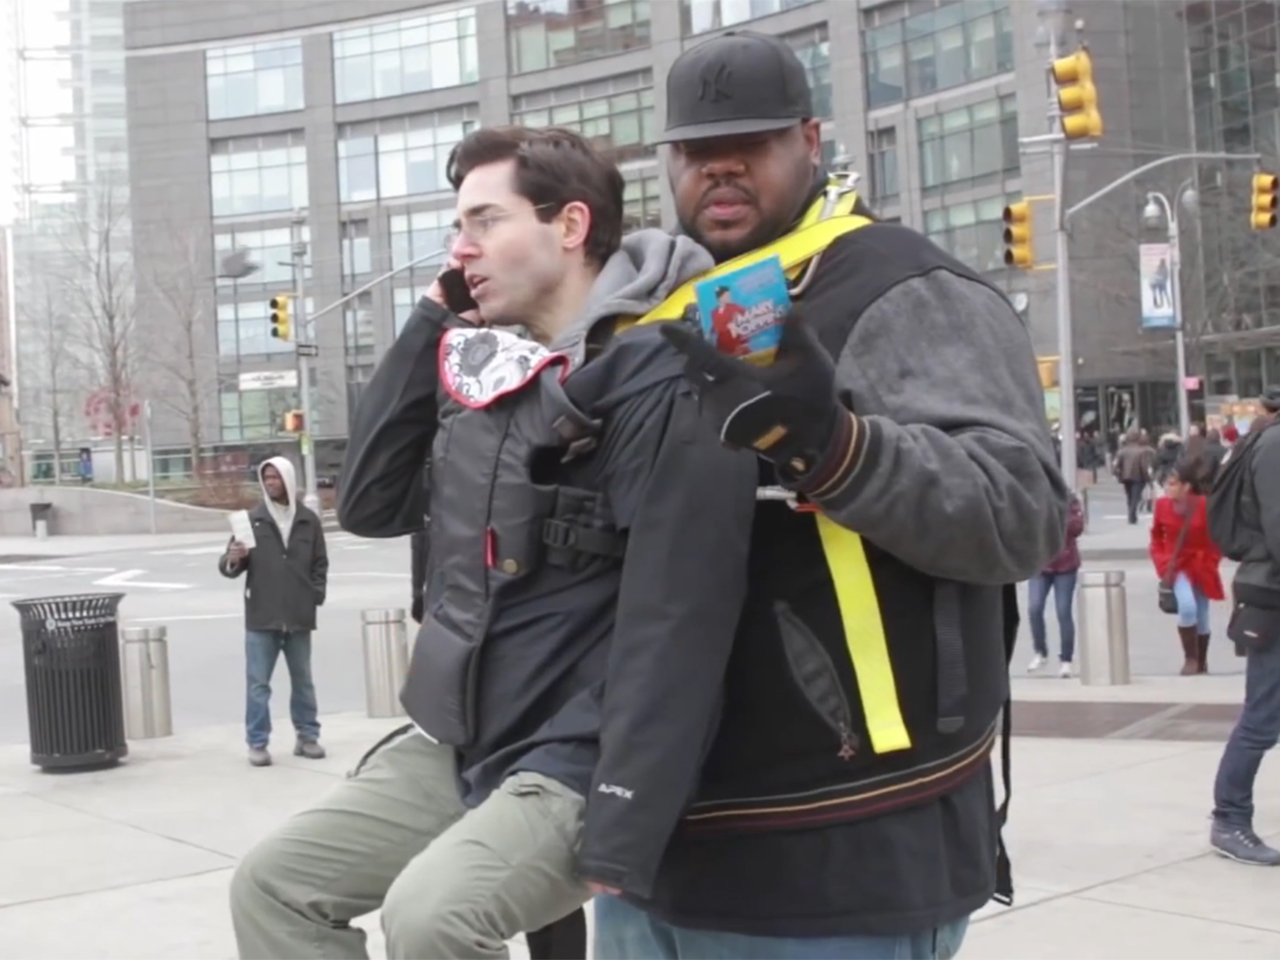 Man toted around NYC in baby carrier by 